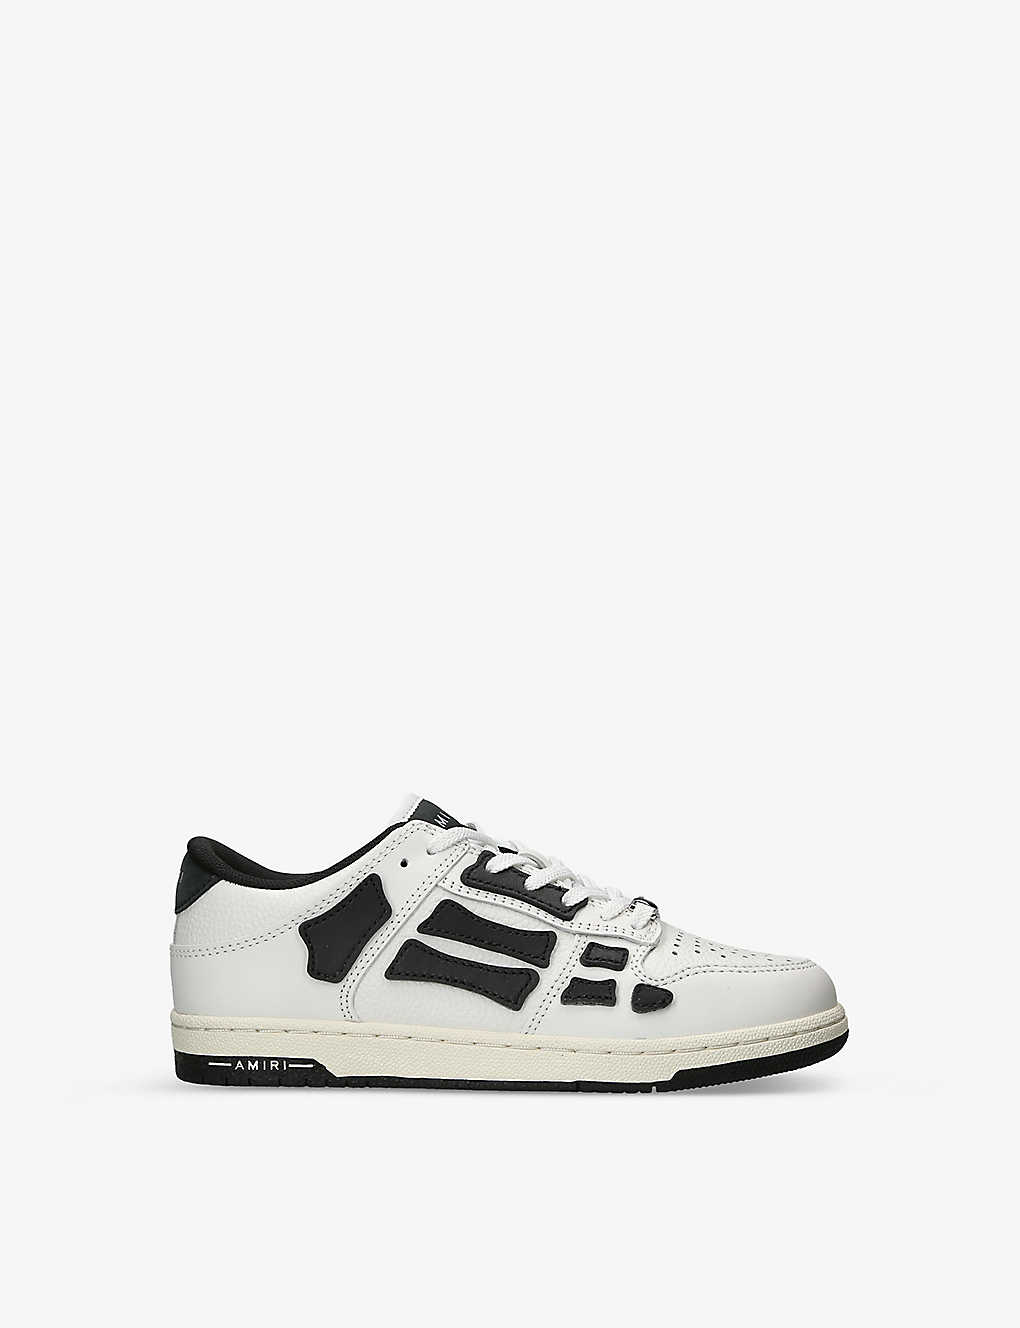 Shop Amiri Boys White/blk Kids Skel Leather Low-top Trainers 3-8 Years